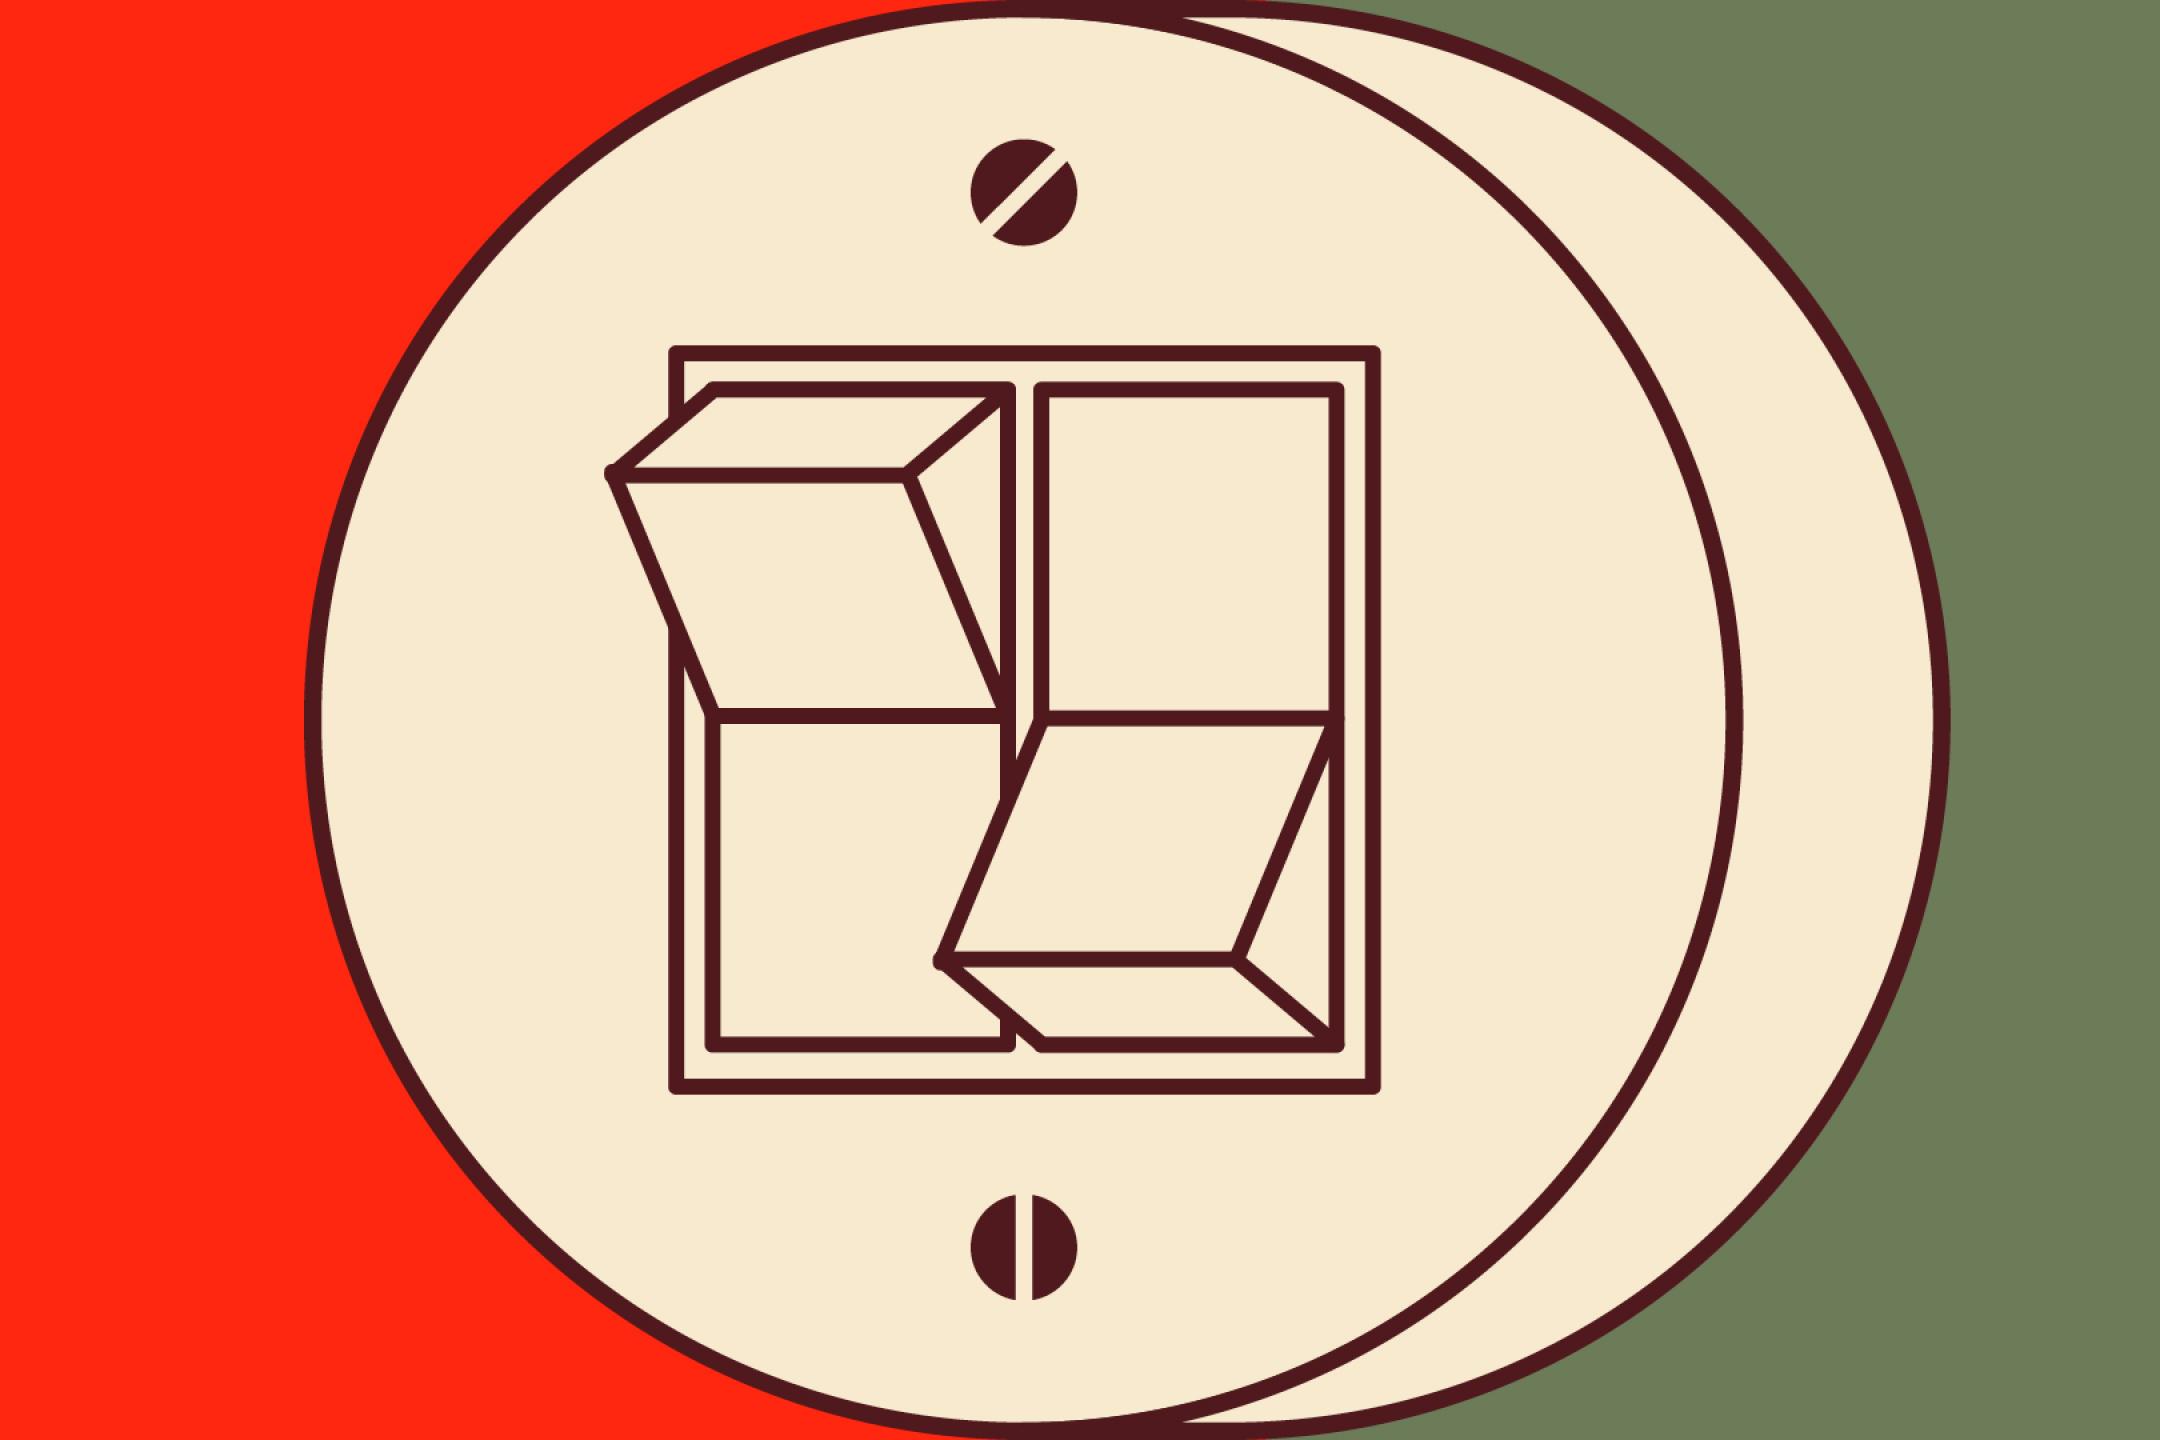 The 2021 DOK Leipzig poster design: A round-shaped double switch in a retro design. 